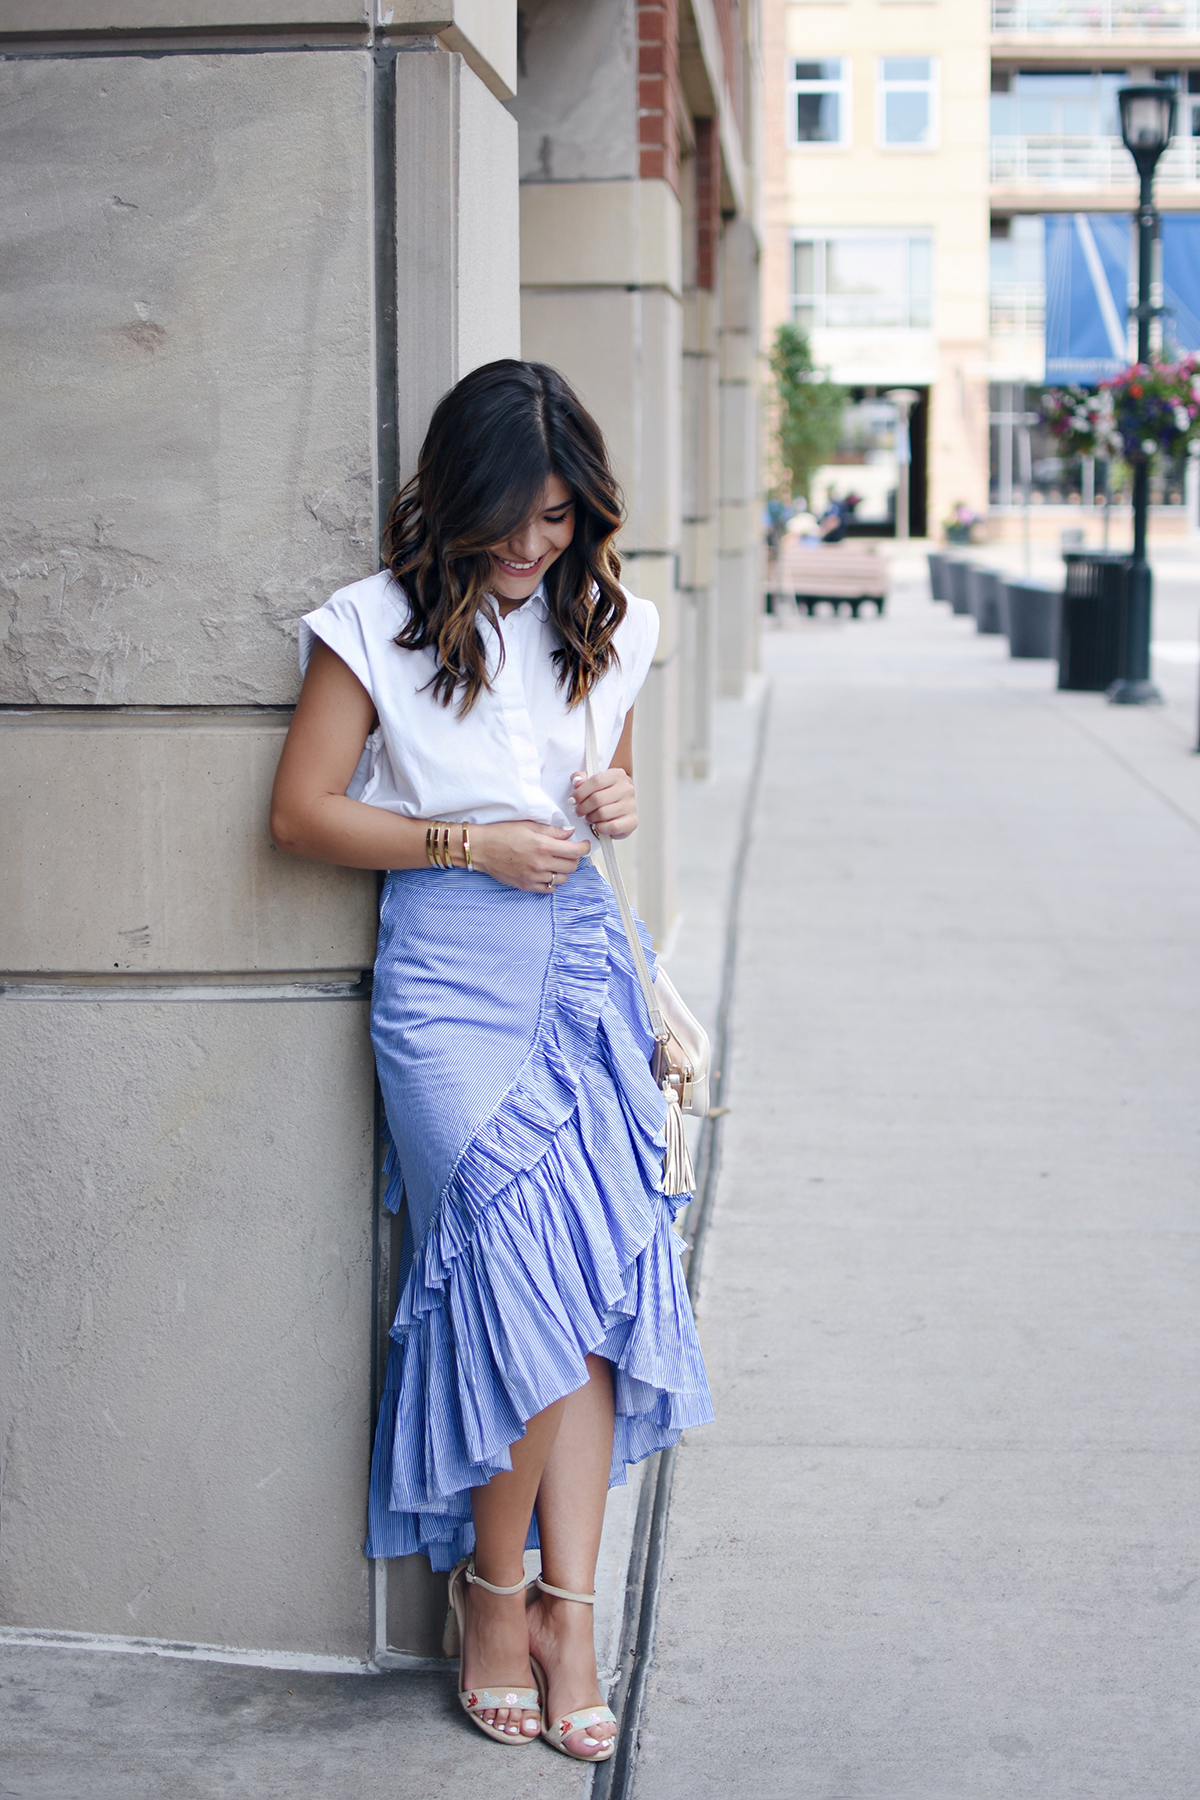 HOW TO STYLE A RUFFLE MAXI SKIRT, CHIC TALK